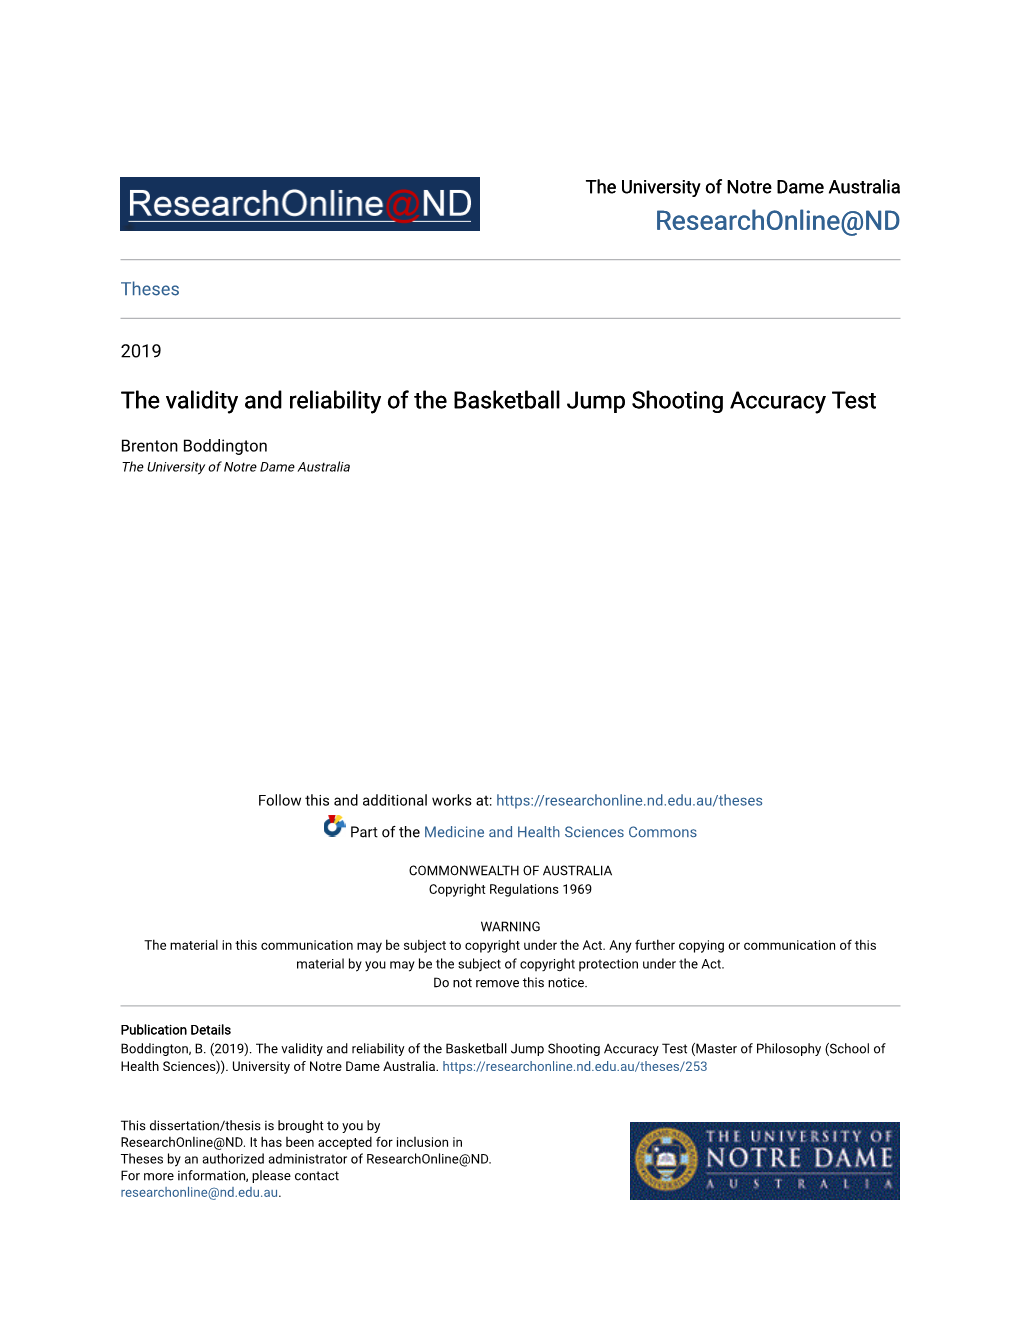 The Validity and Reliability of the Basketball Jump Shooting Accuracy Test